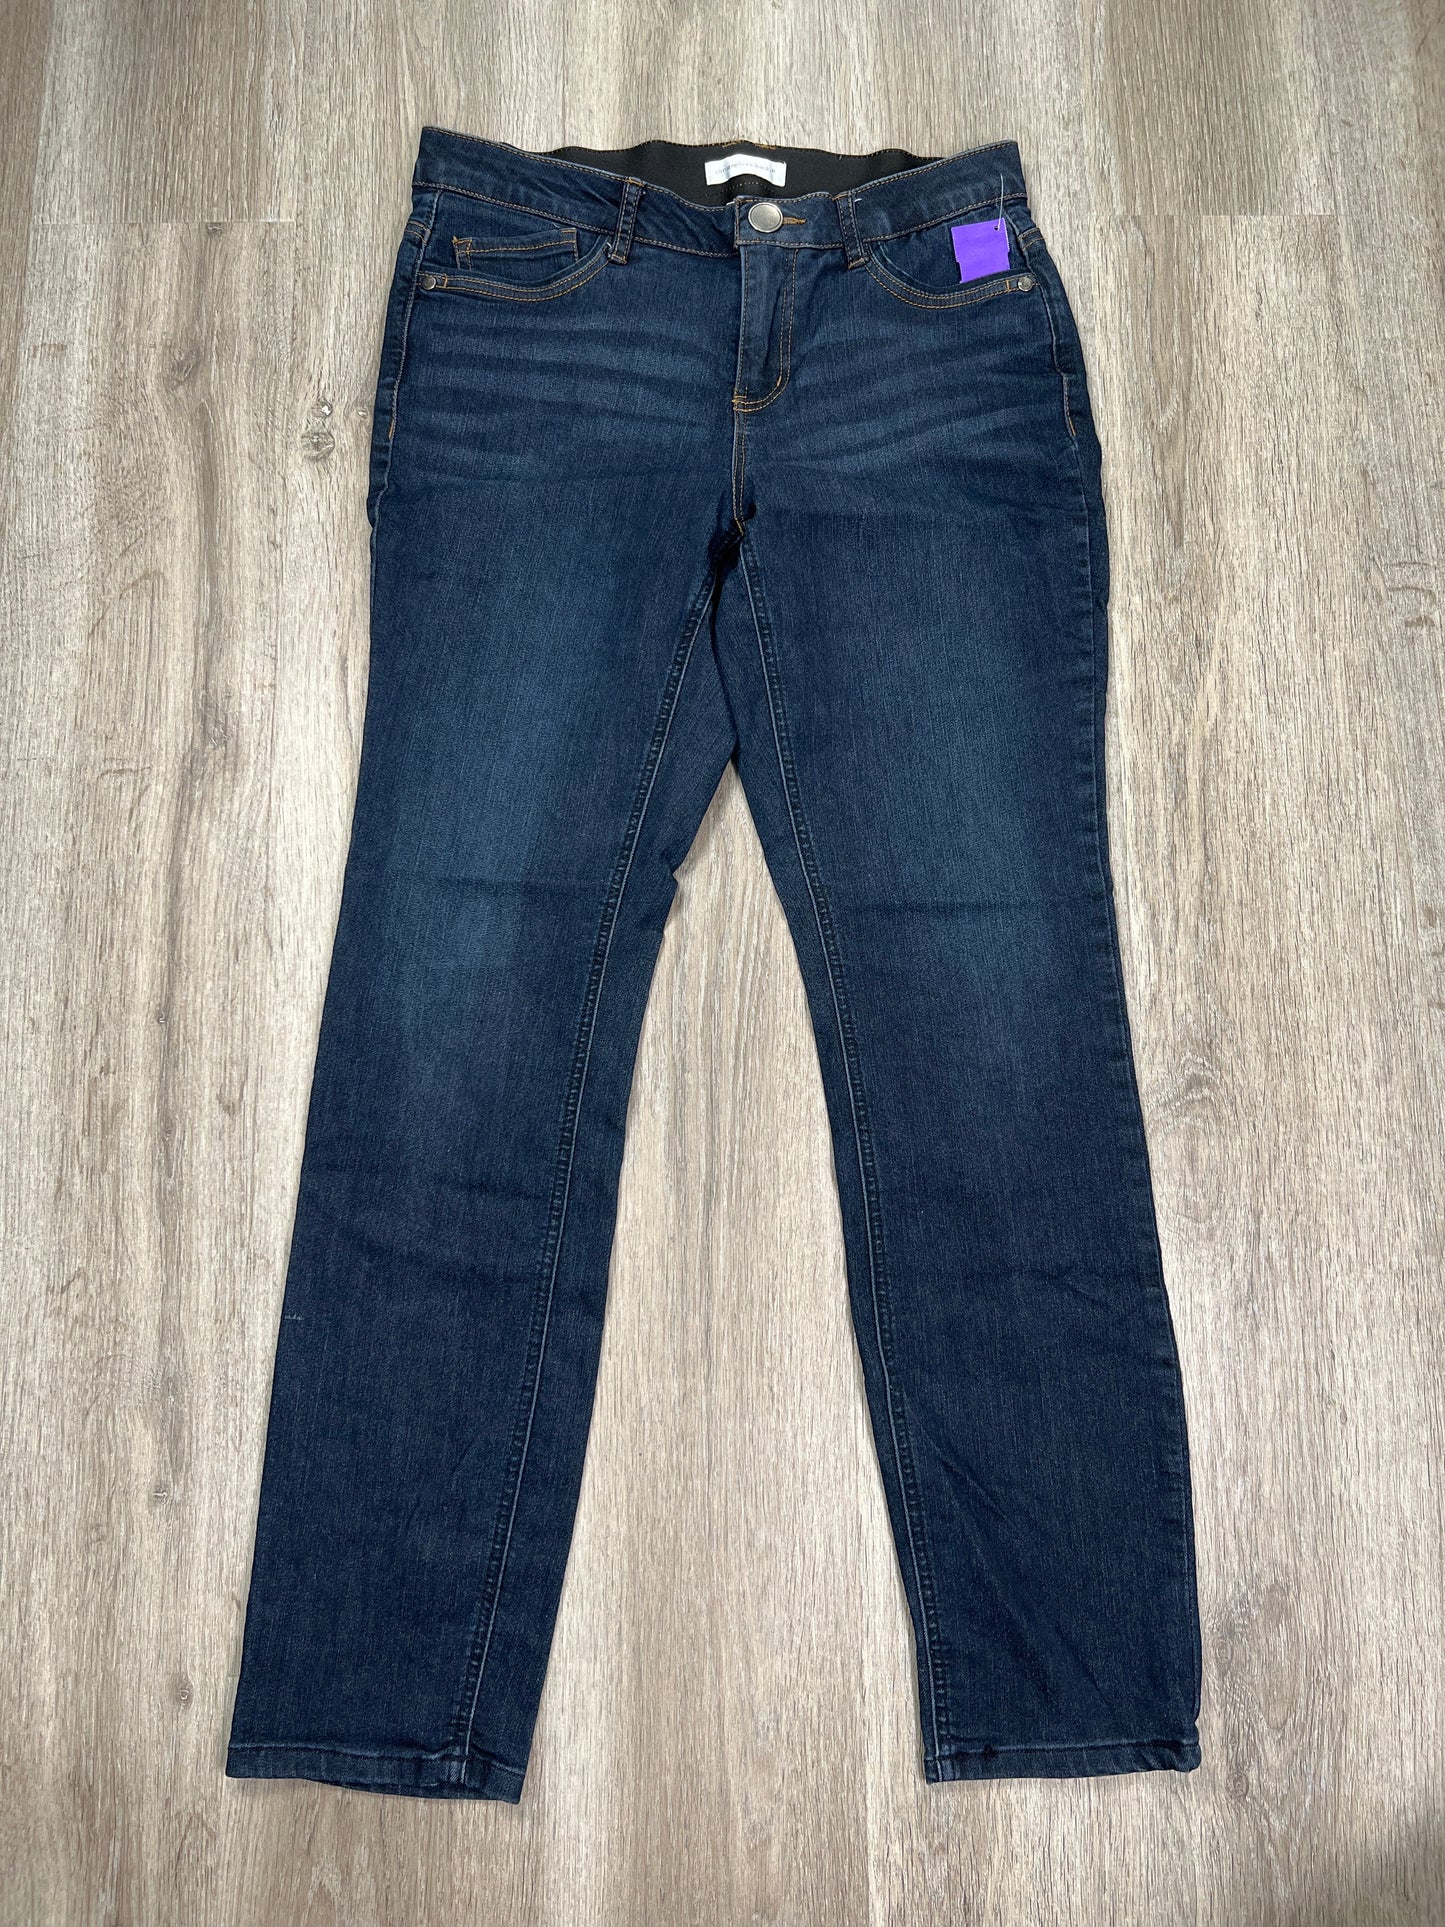 Blue Denim Jeans Straight Christopher And Banks, Size 6